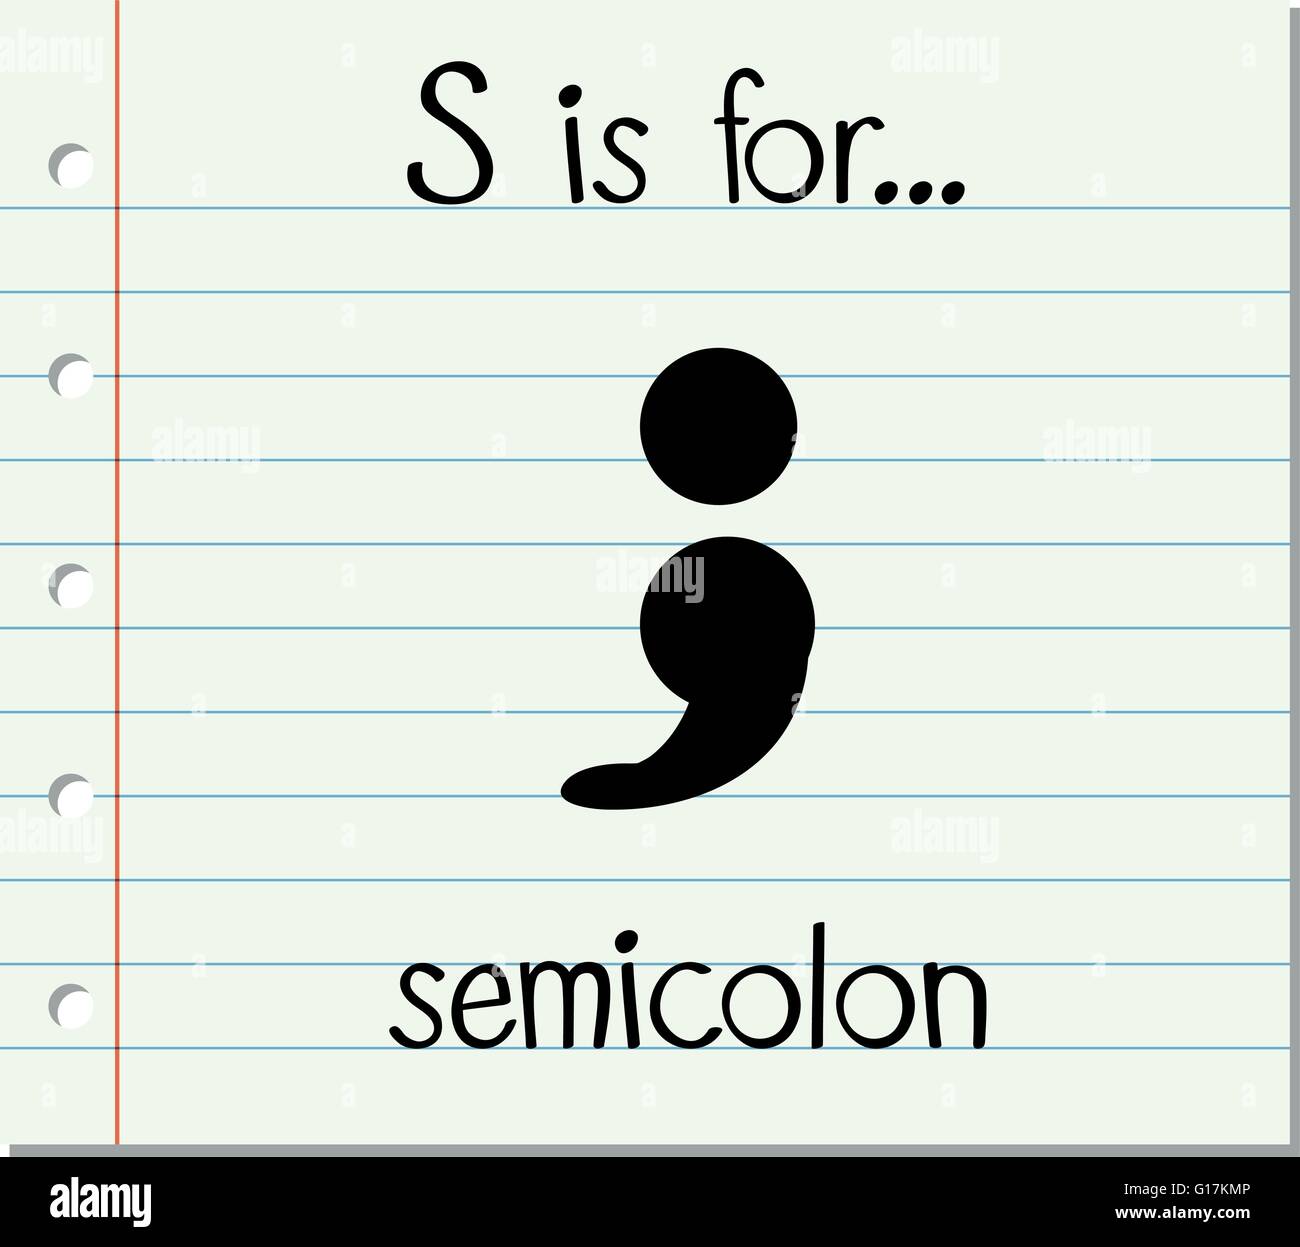 Flashcard letter S is for semicolon illustration Stock Vector